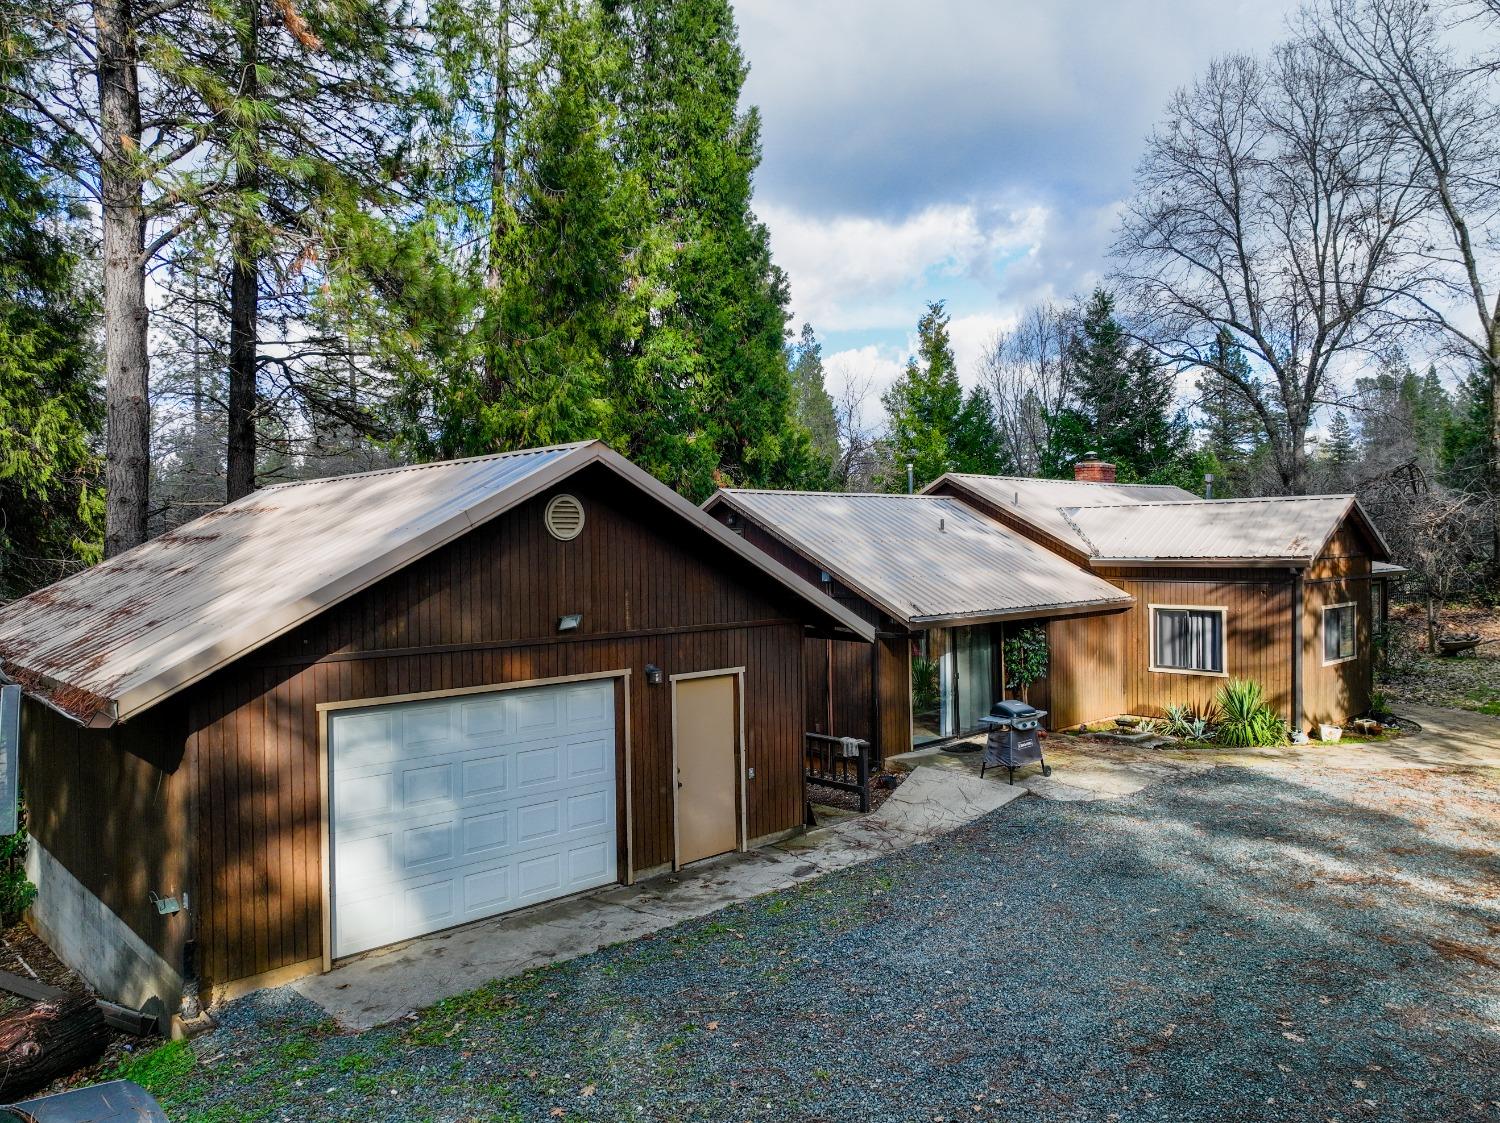 Photo of 11078 Nugget Ln in Grass Valley, CA